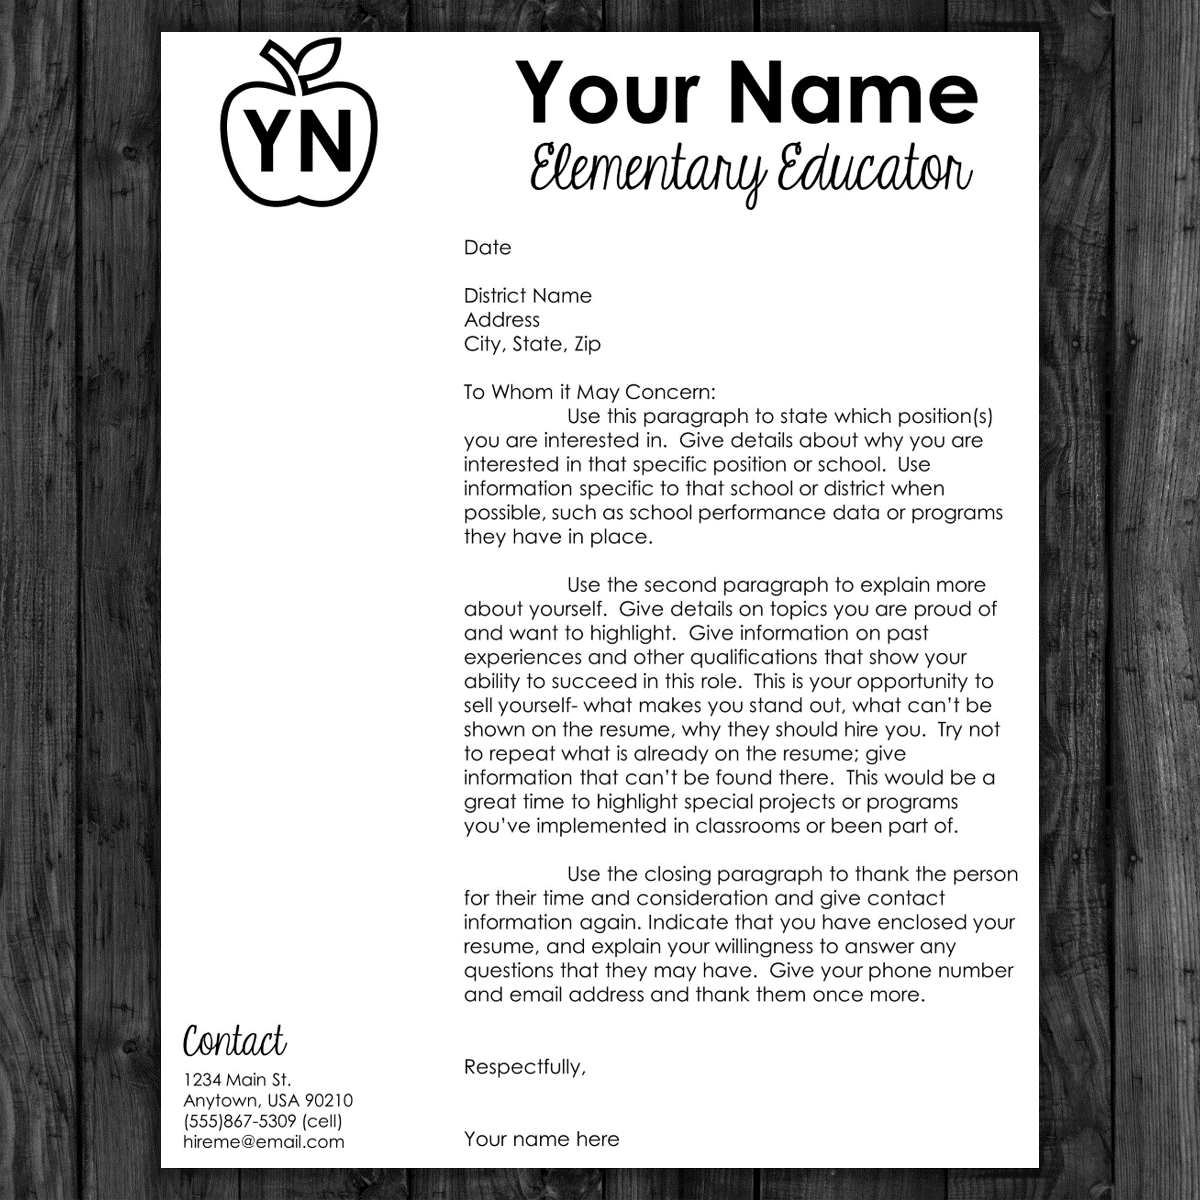 Teacher resume cover letter template on gray tabletop with sample name and text